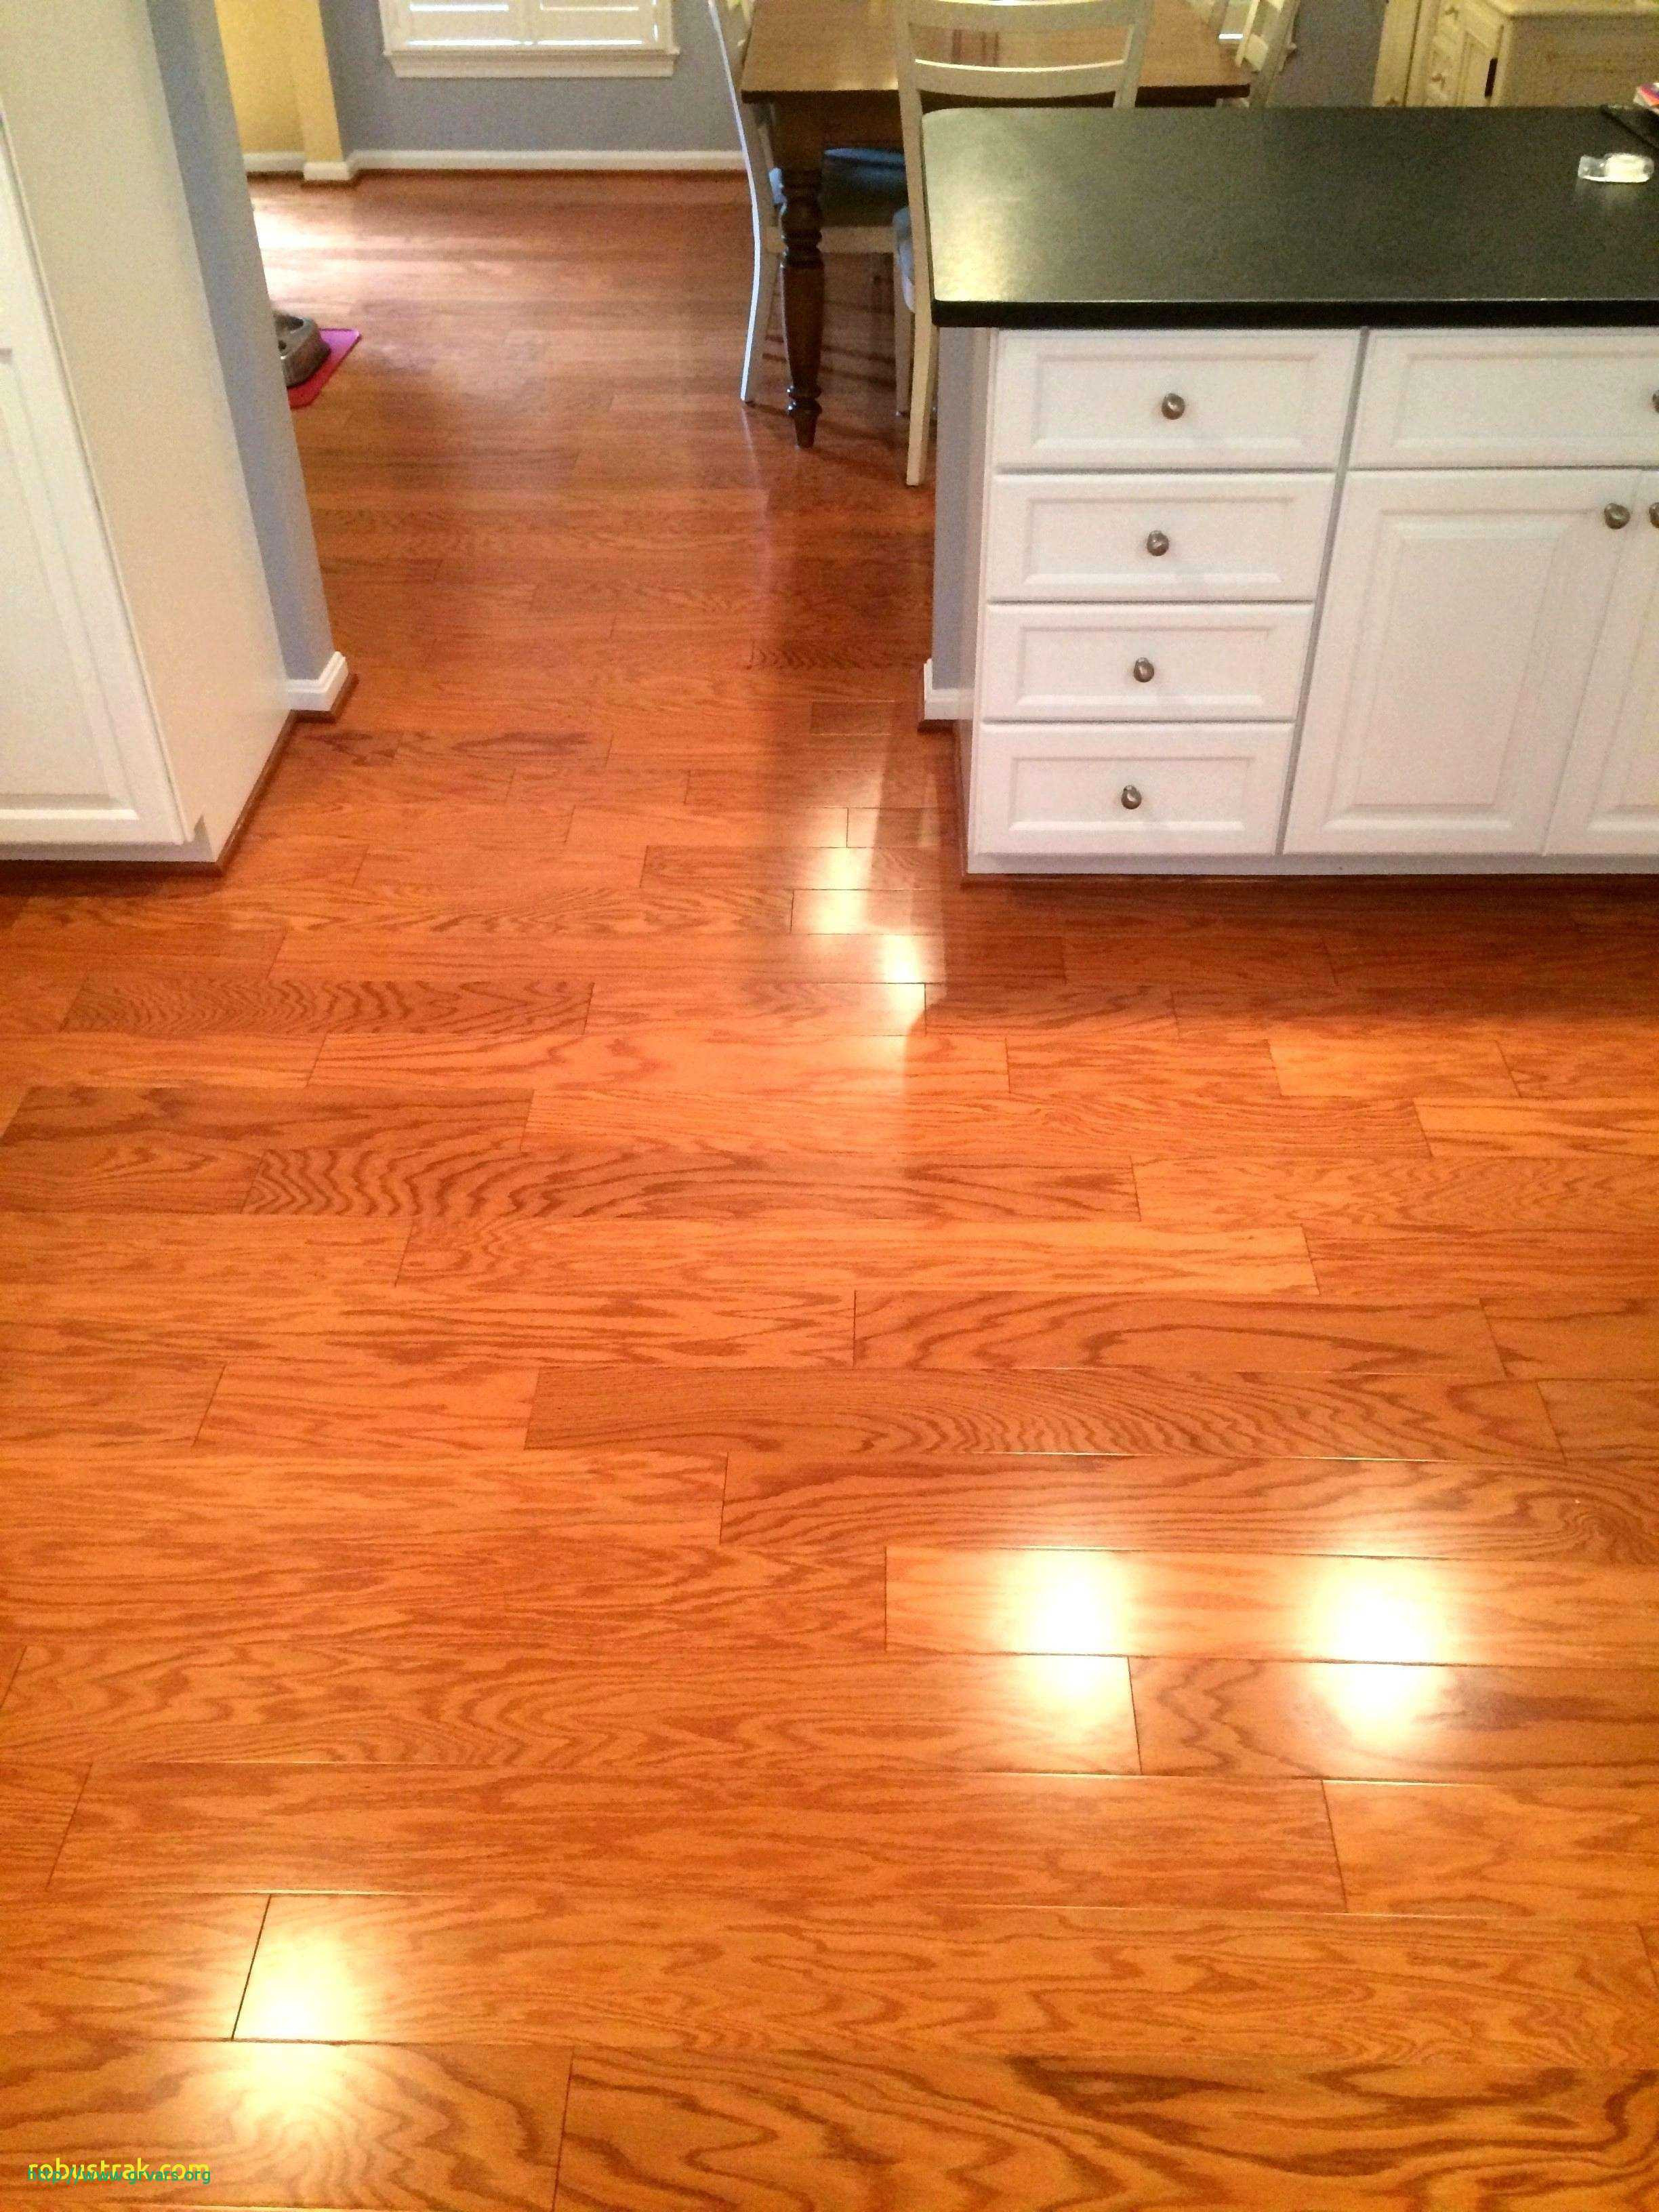 29 Popular Hand Scraped Hardwood Flooring wholesale 2022 free download hand scraped hardwood flooring wholesale of 25 beau fore wood floors ideas blog intended for hardwood floors in the kitchen fresh where to buy hardwood flooring inspirational 0d grace place 